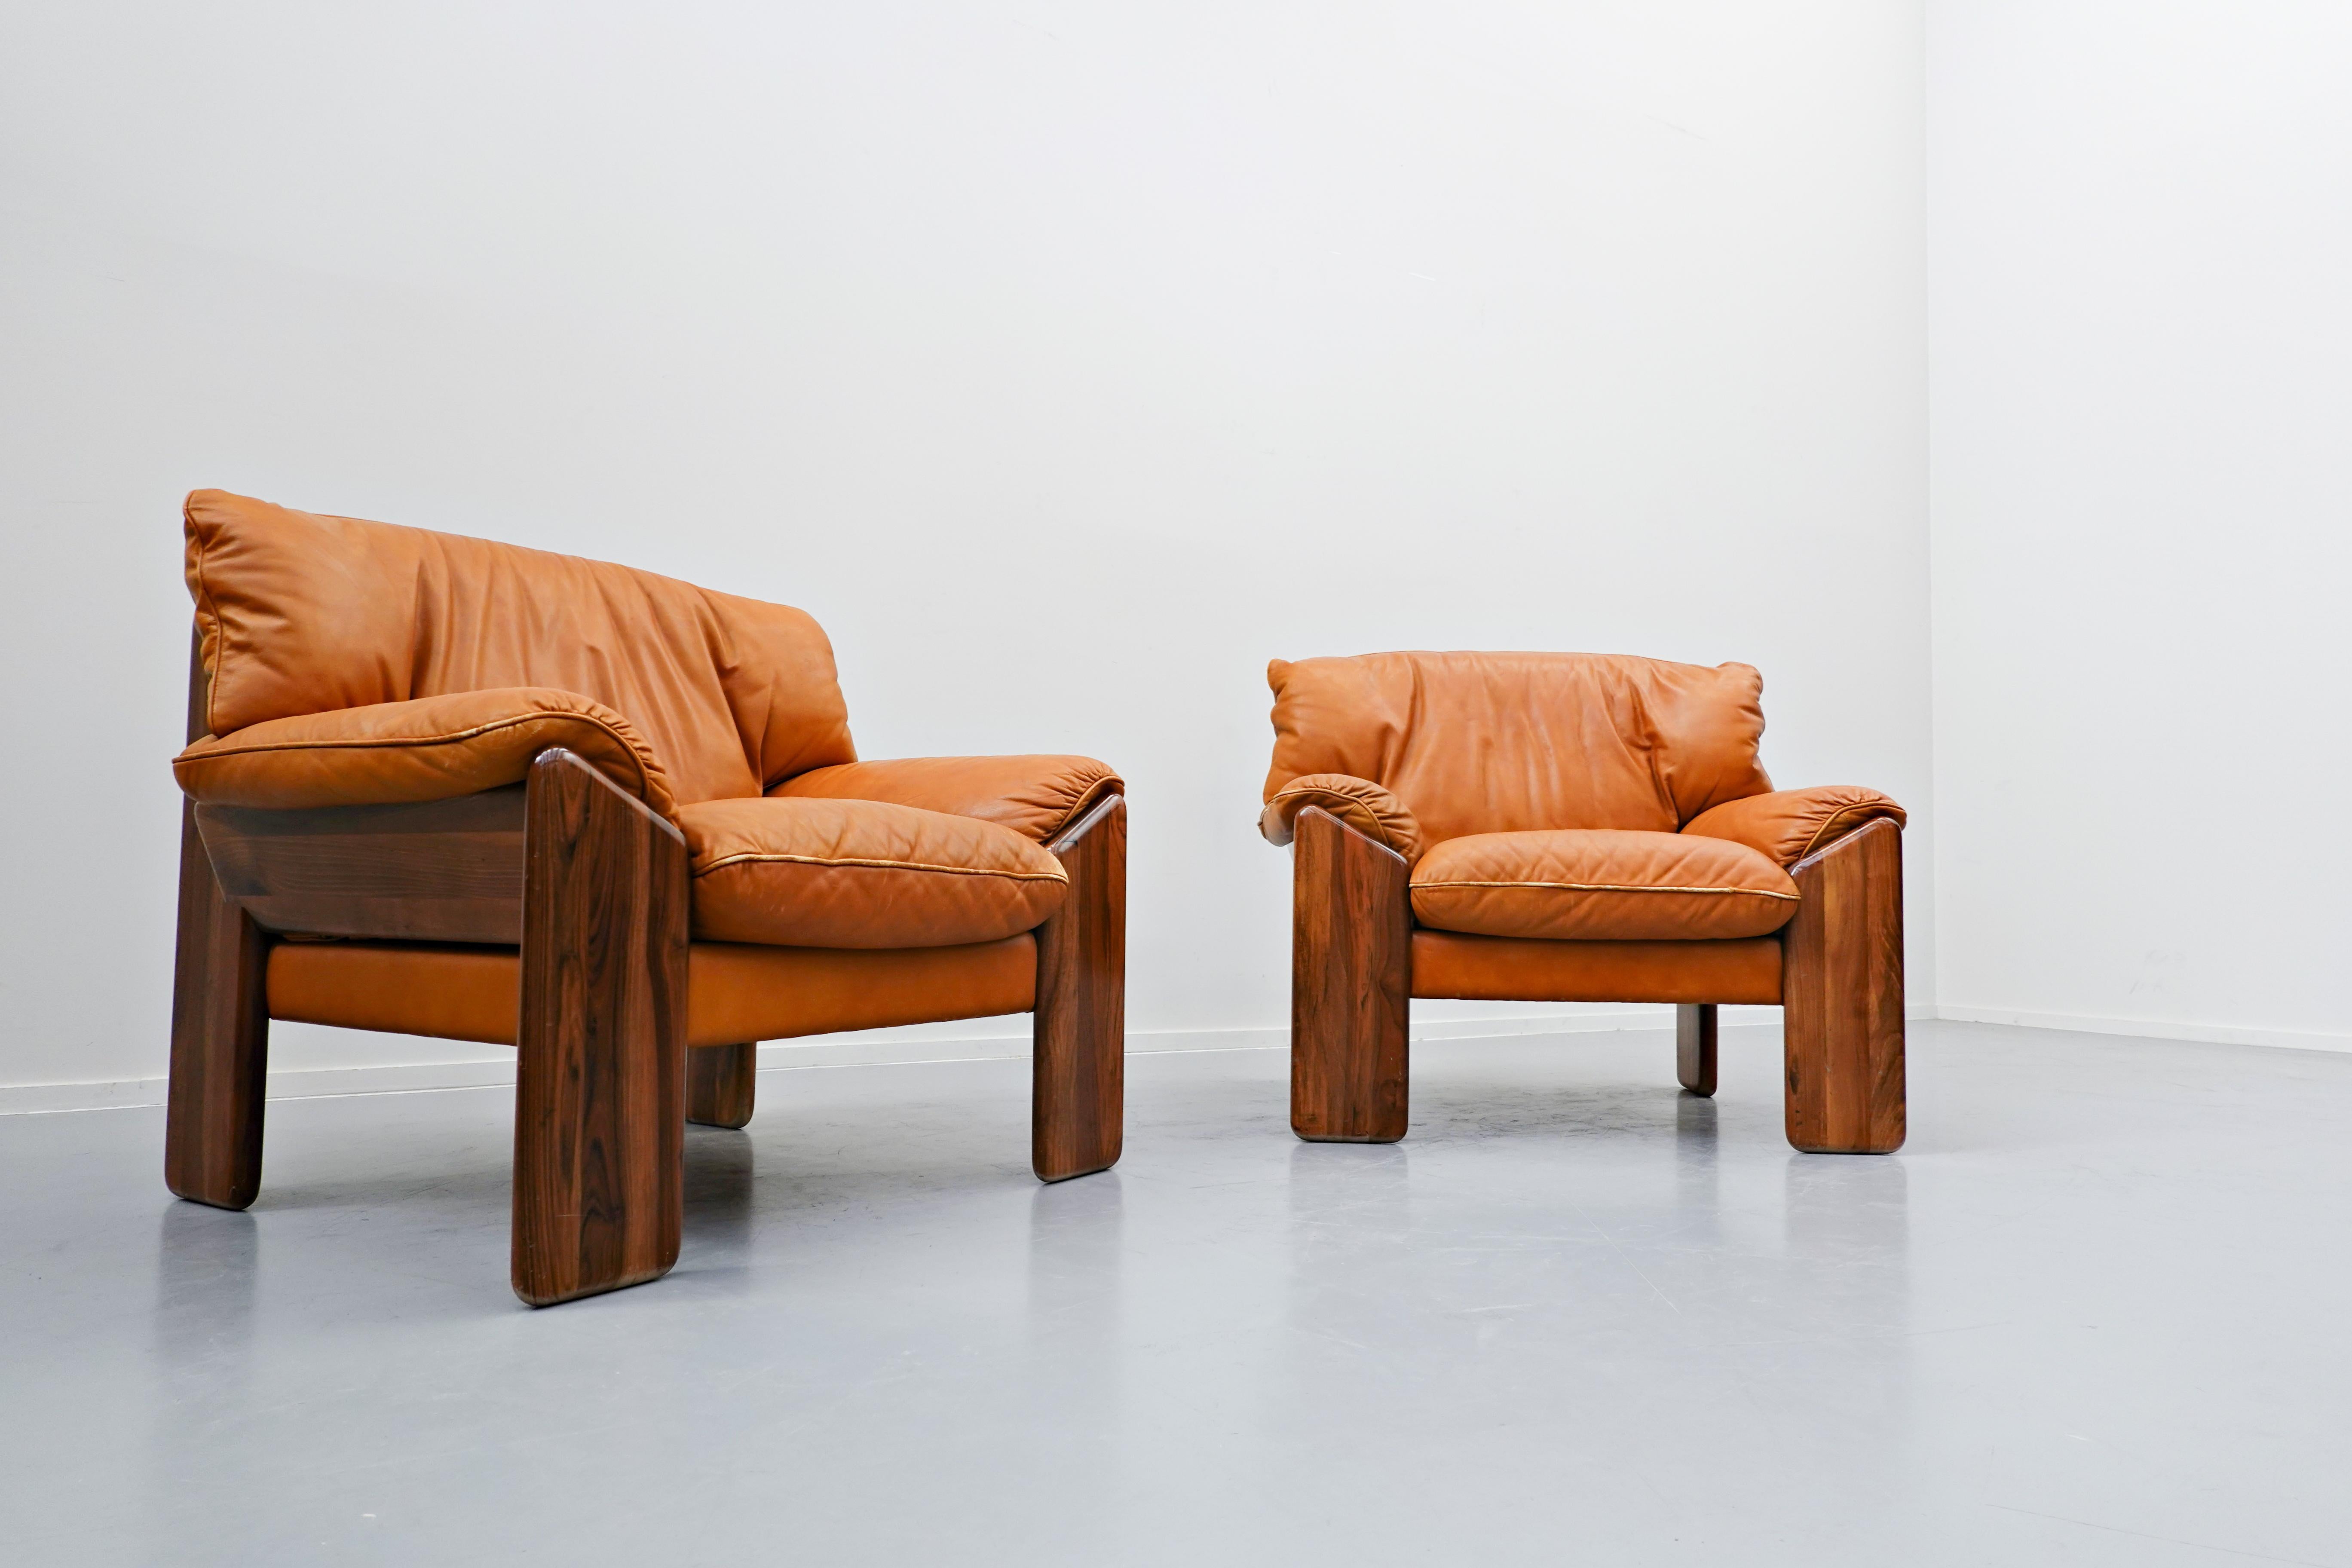 Pair of Italian armchairs by Sapporo for Mobil Girgi, 1970s.